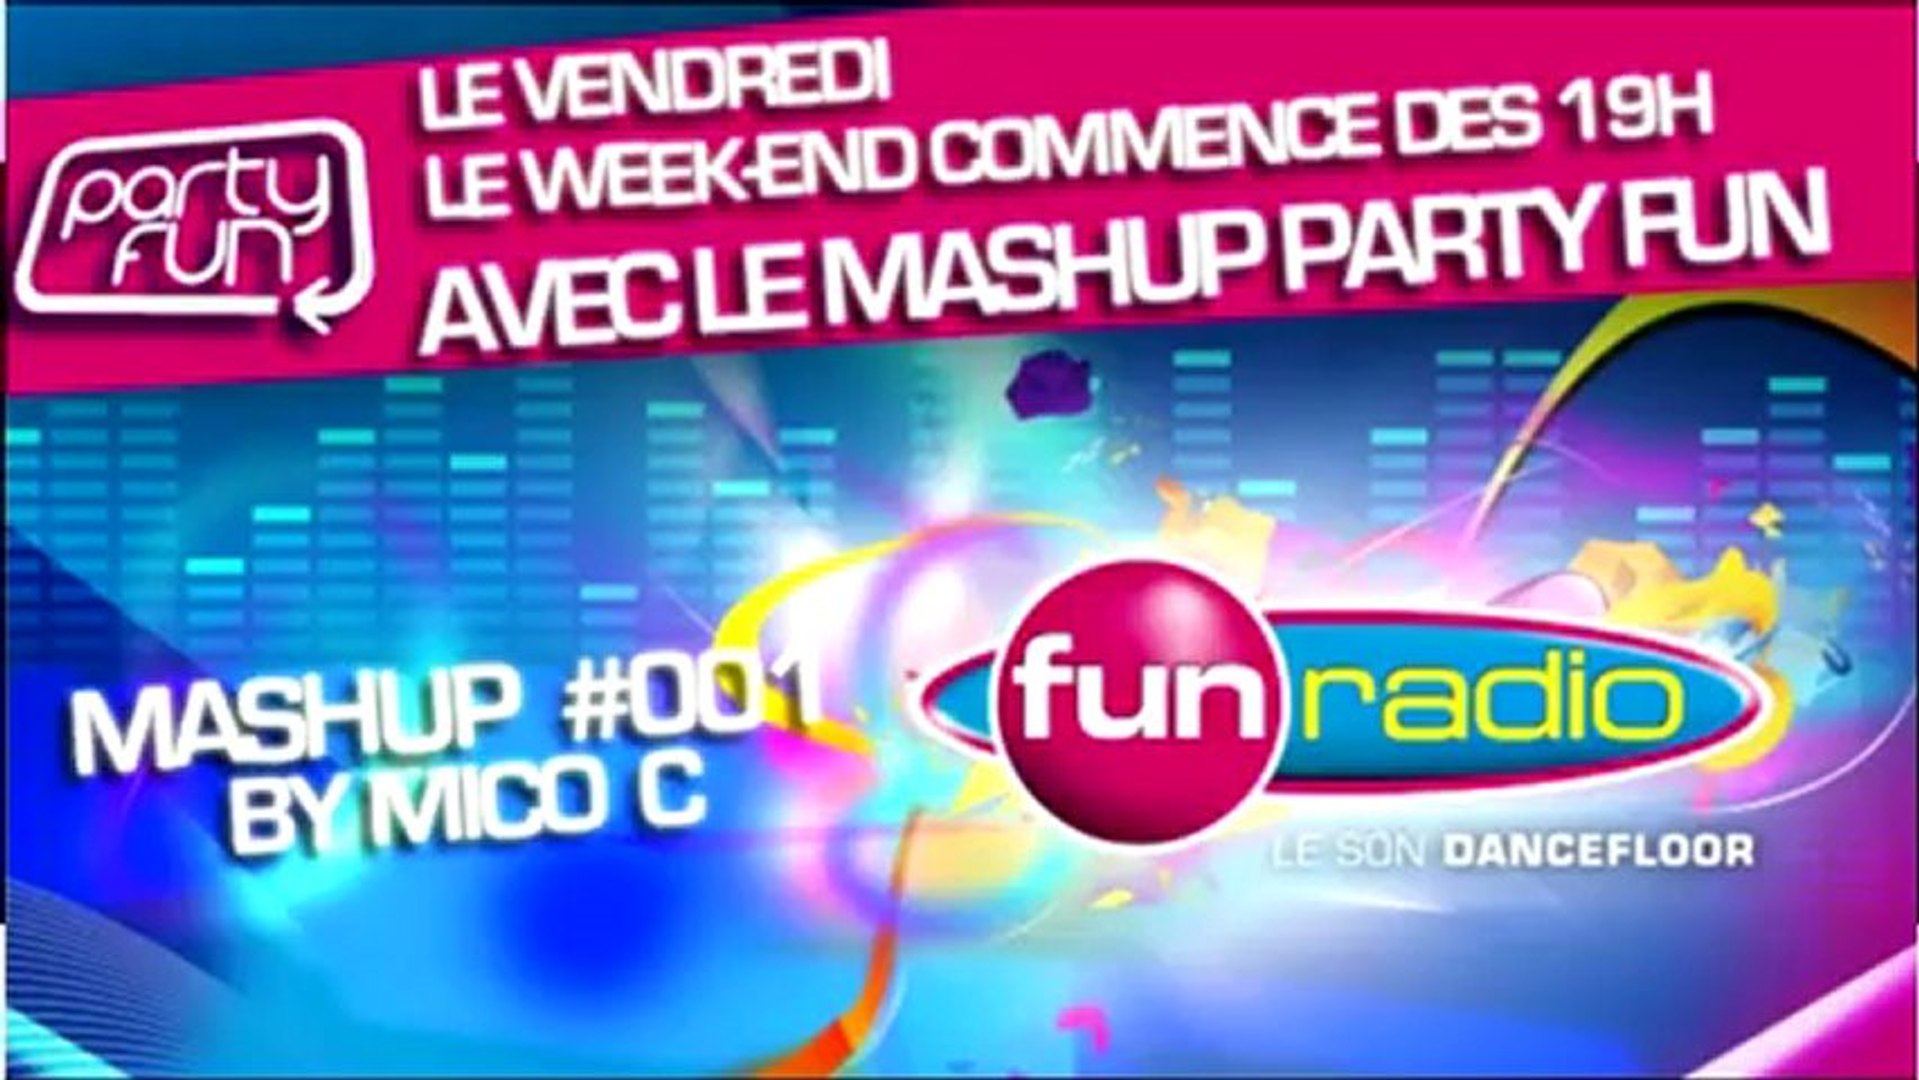 Mash Up Party Fun #001 by Mico C . - Vidéo Dailymotion